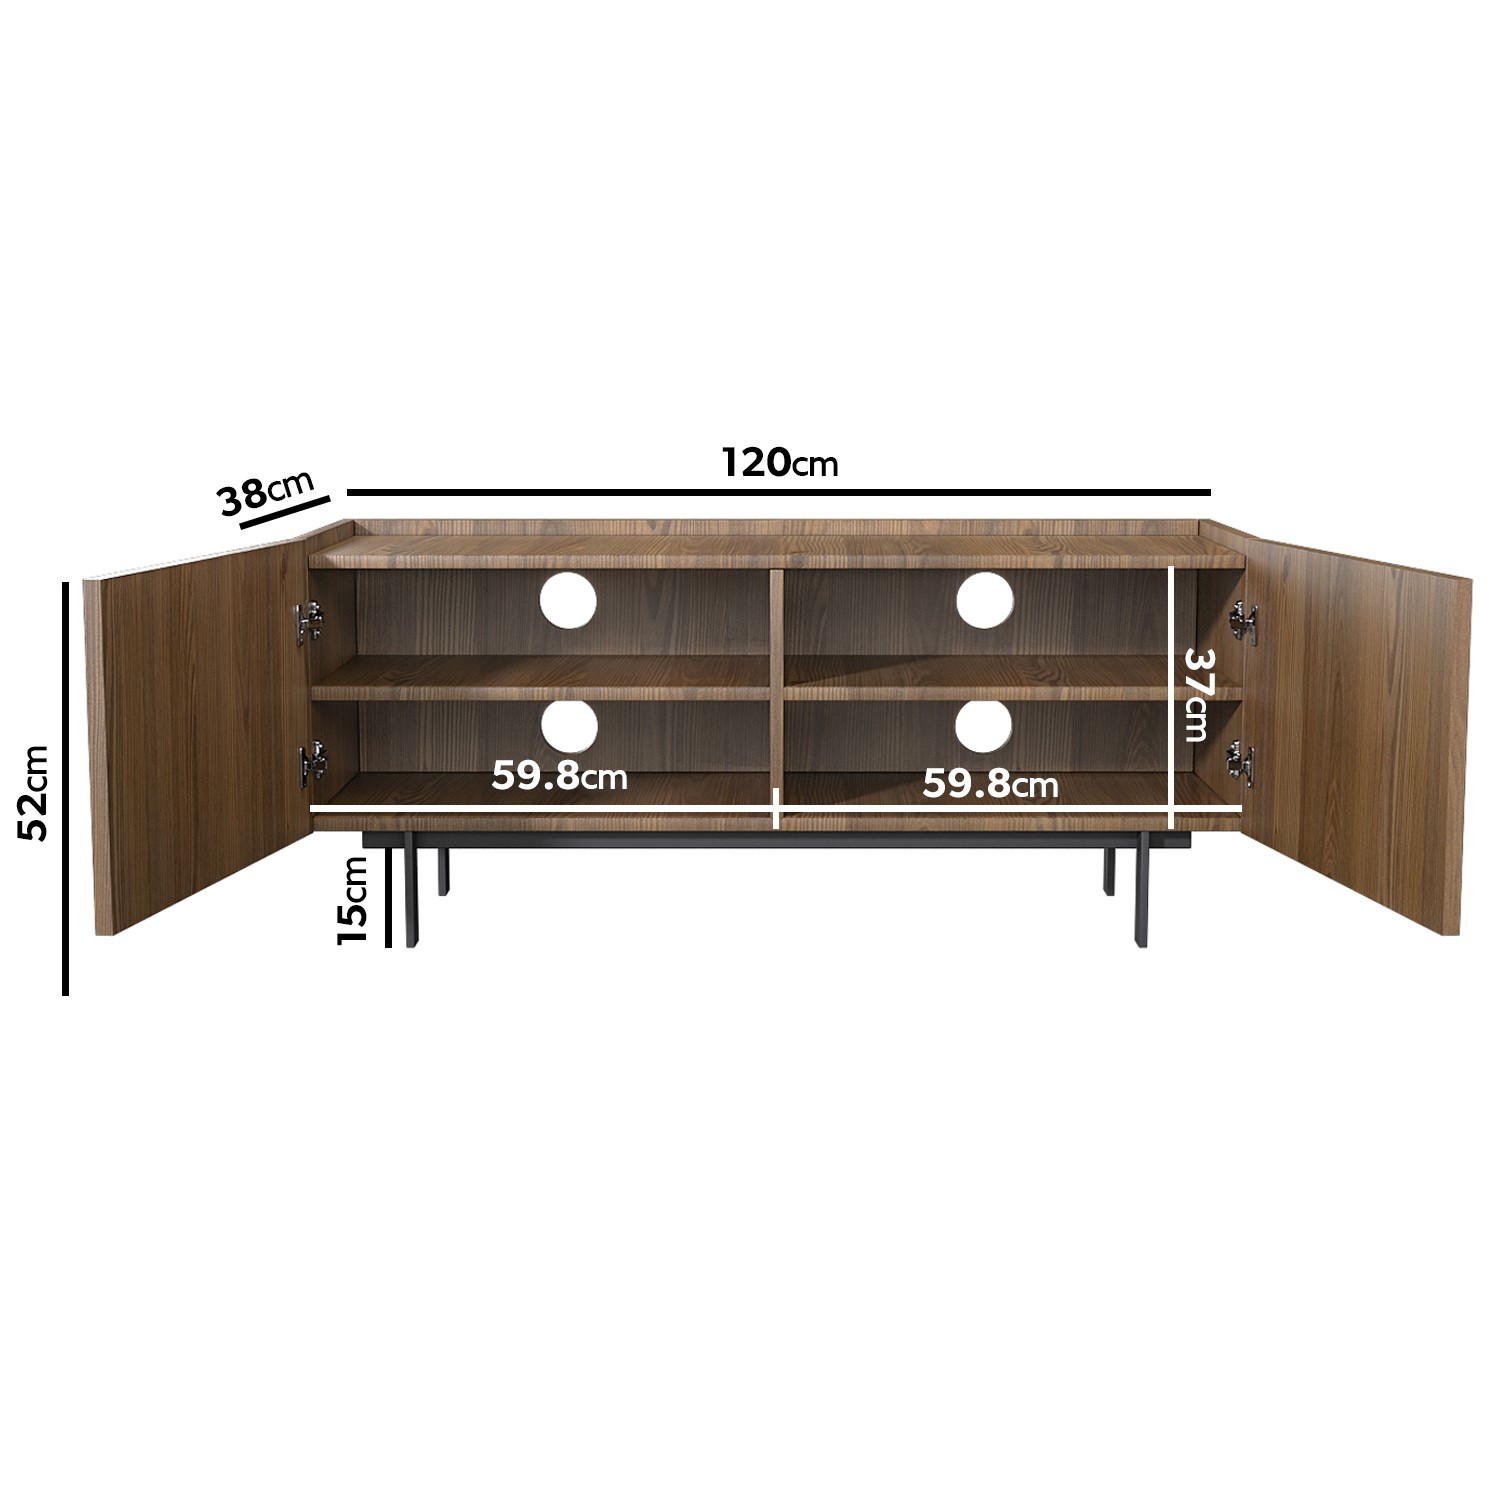 Read more about Small walnut tv stand with storage tvs up to 50 helmer